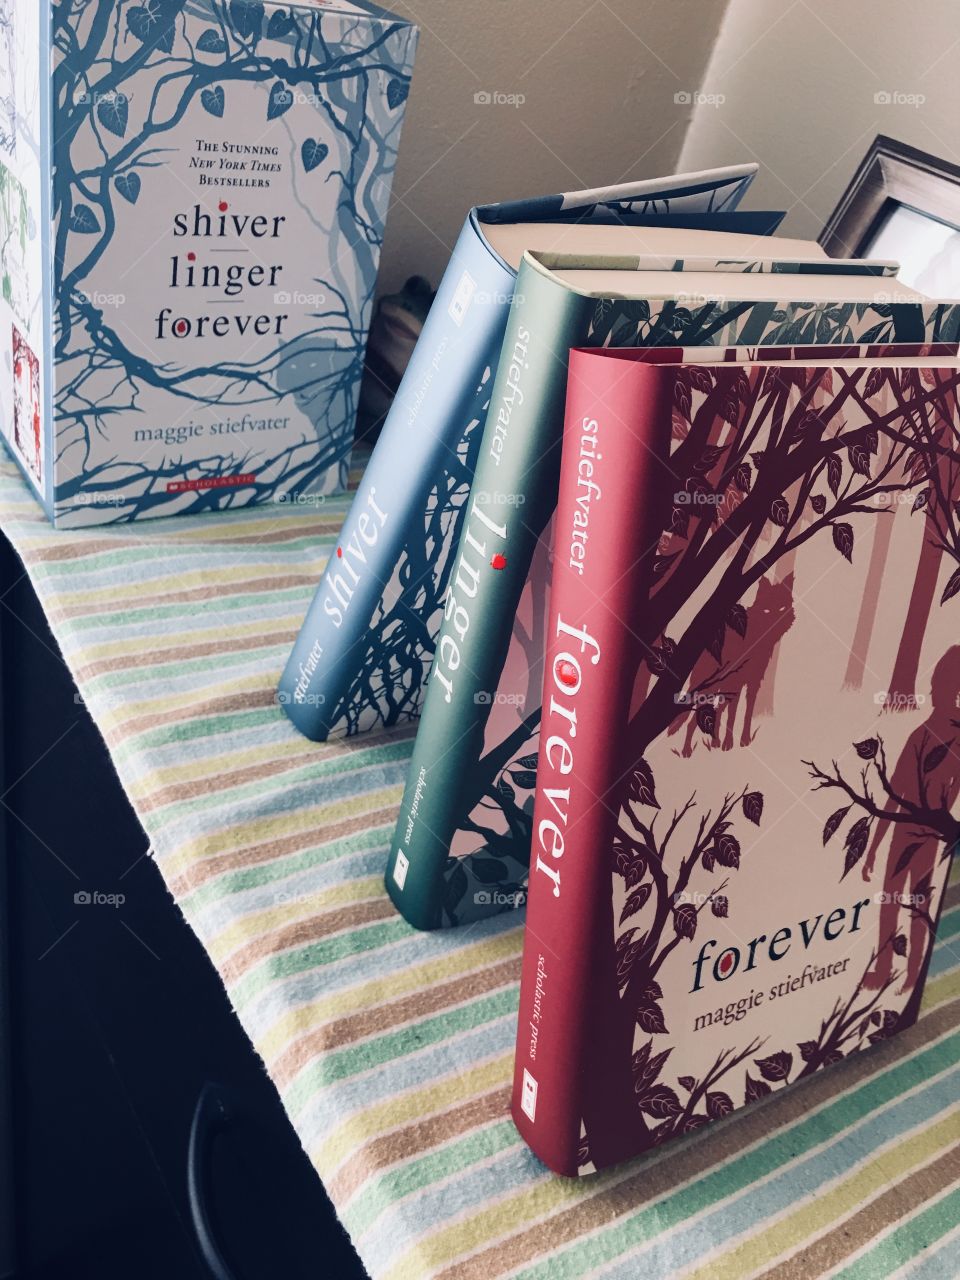 Shiver Trilogy by Maggie Stiefvater. Love the colors and the amazing characters in the books. It’s such an awesome read. 